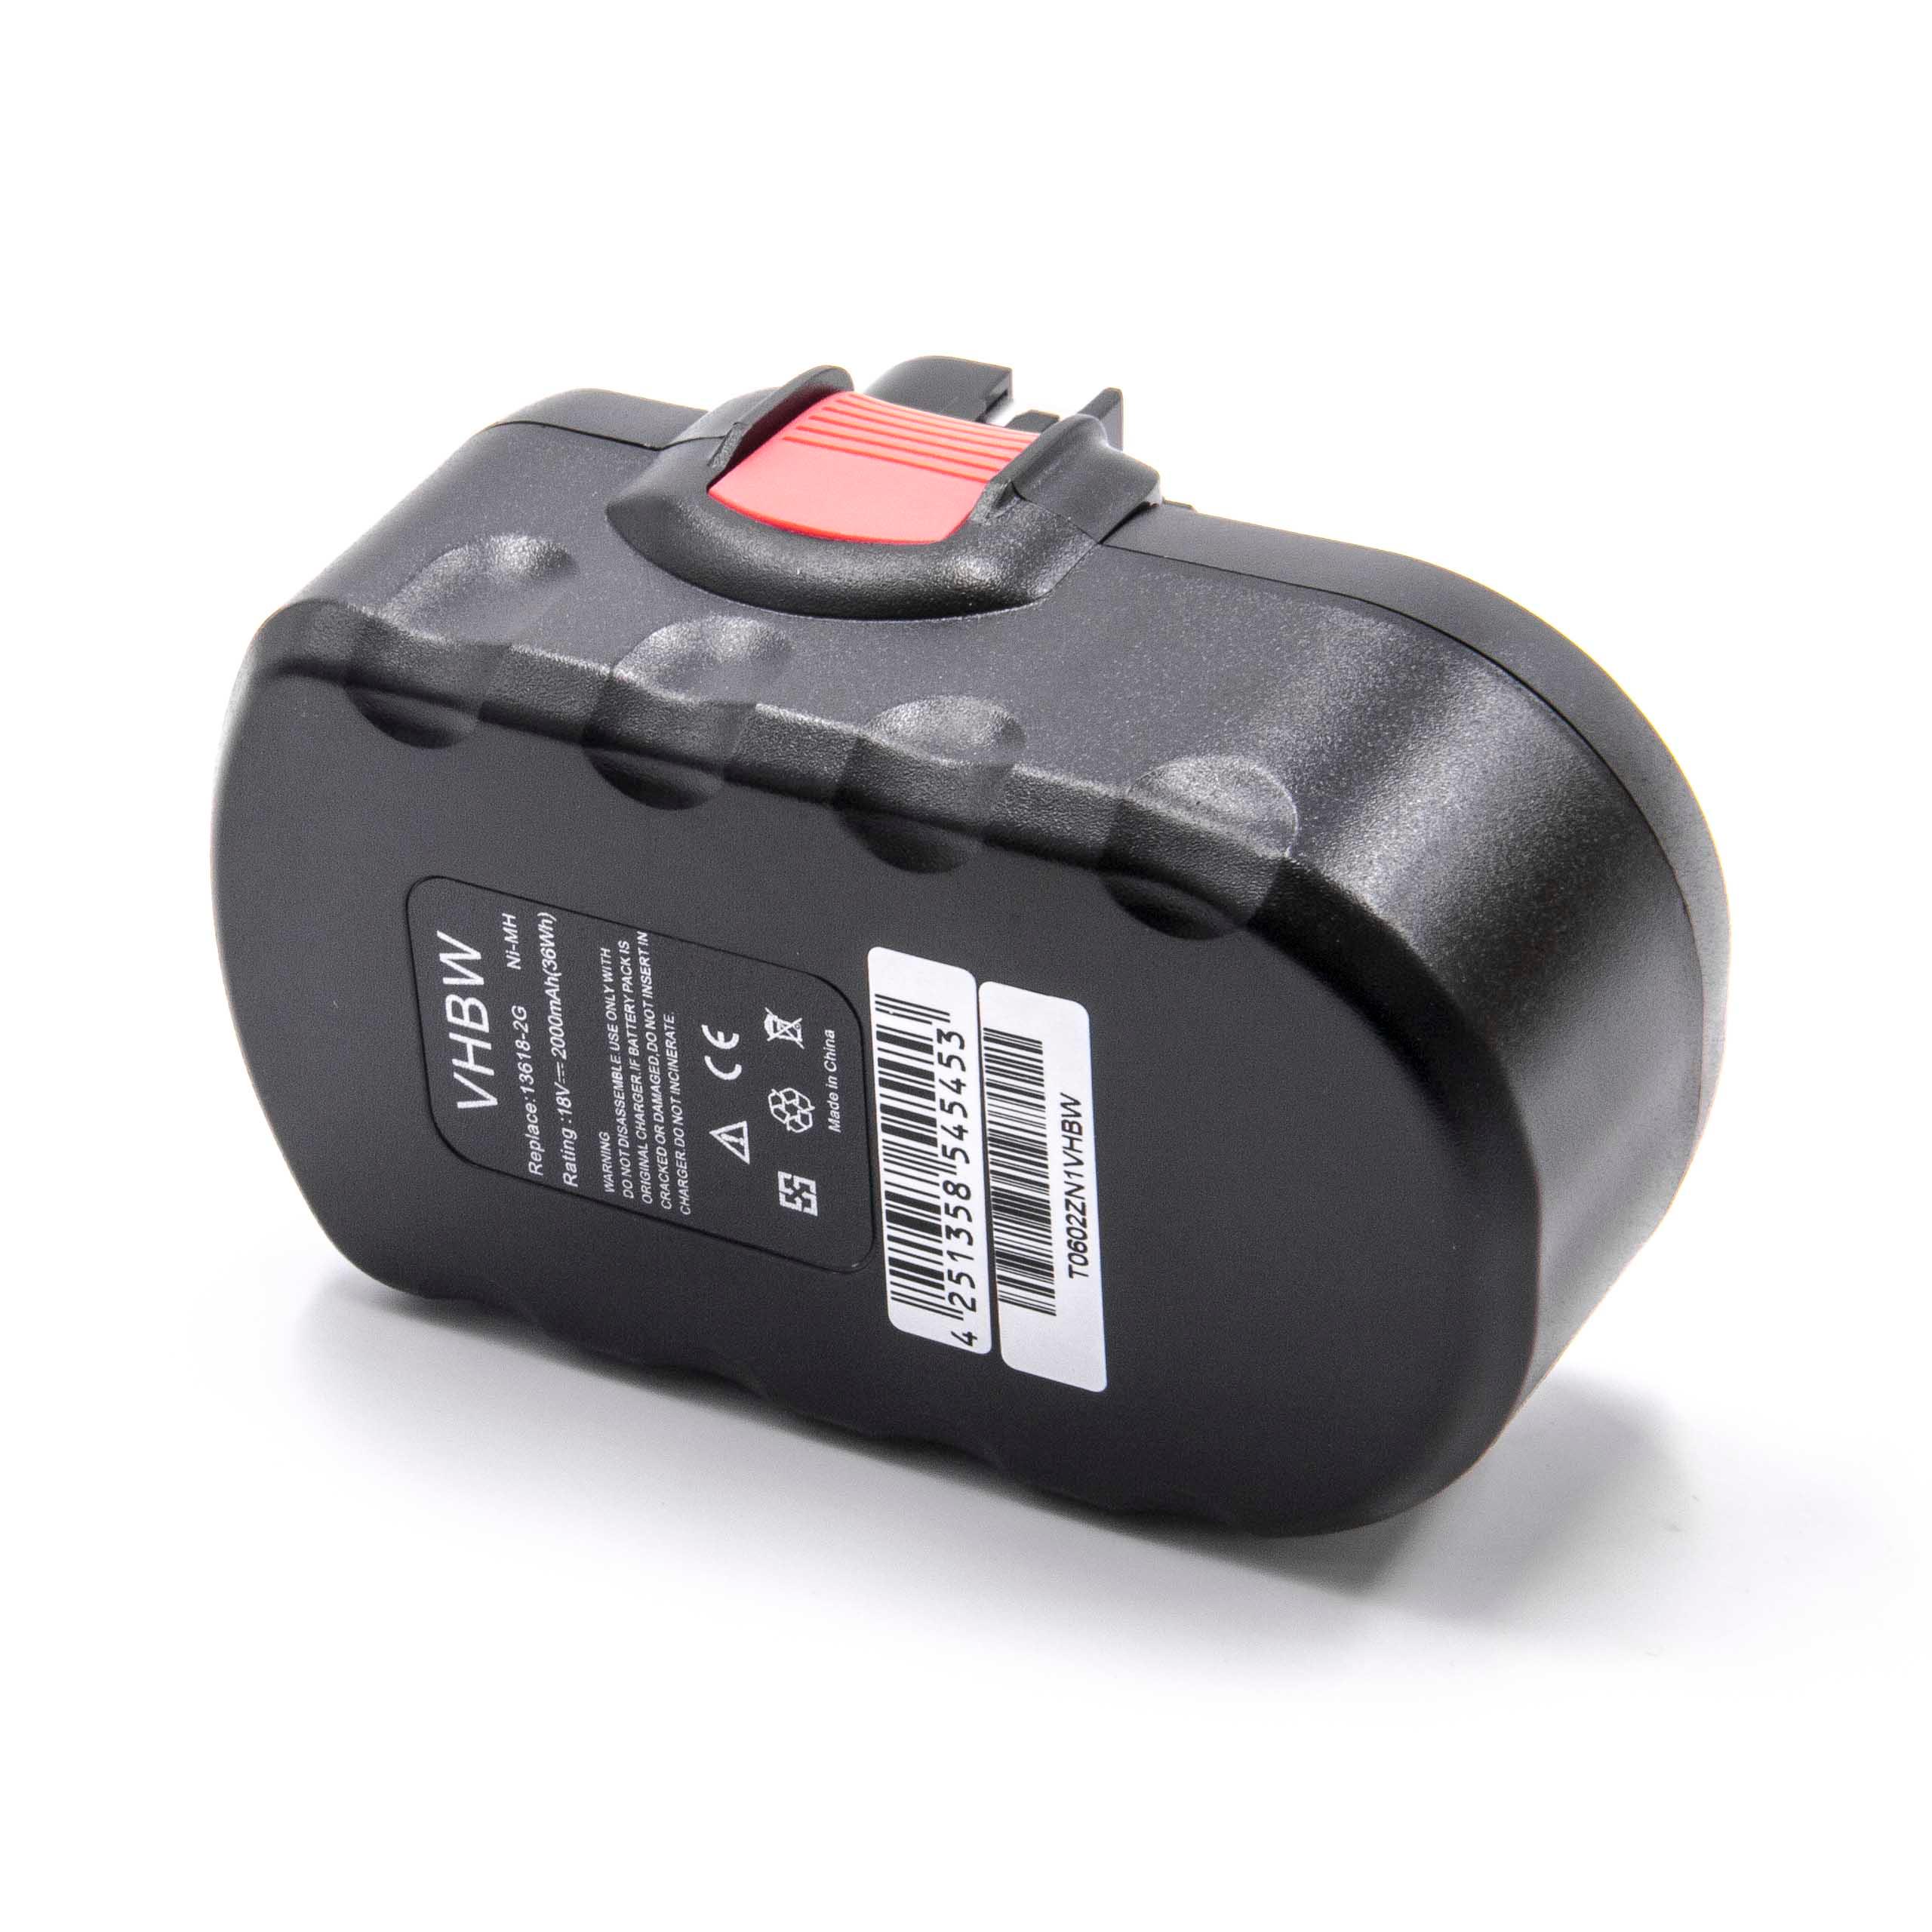 Electric Power Tool Battery Replaces Bosch 2 607 335 278, 2 607 335 266, 2 607 335 536 - 2000 mAh, 18 V, NiMH